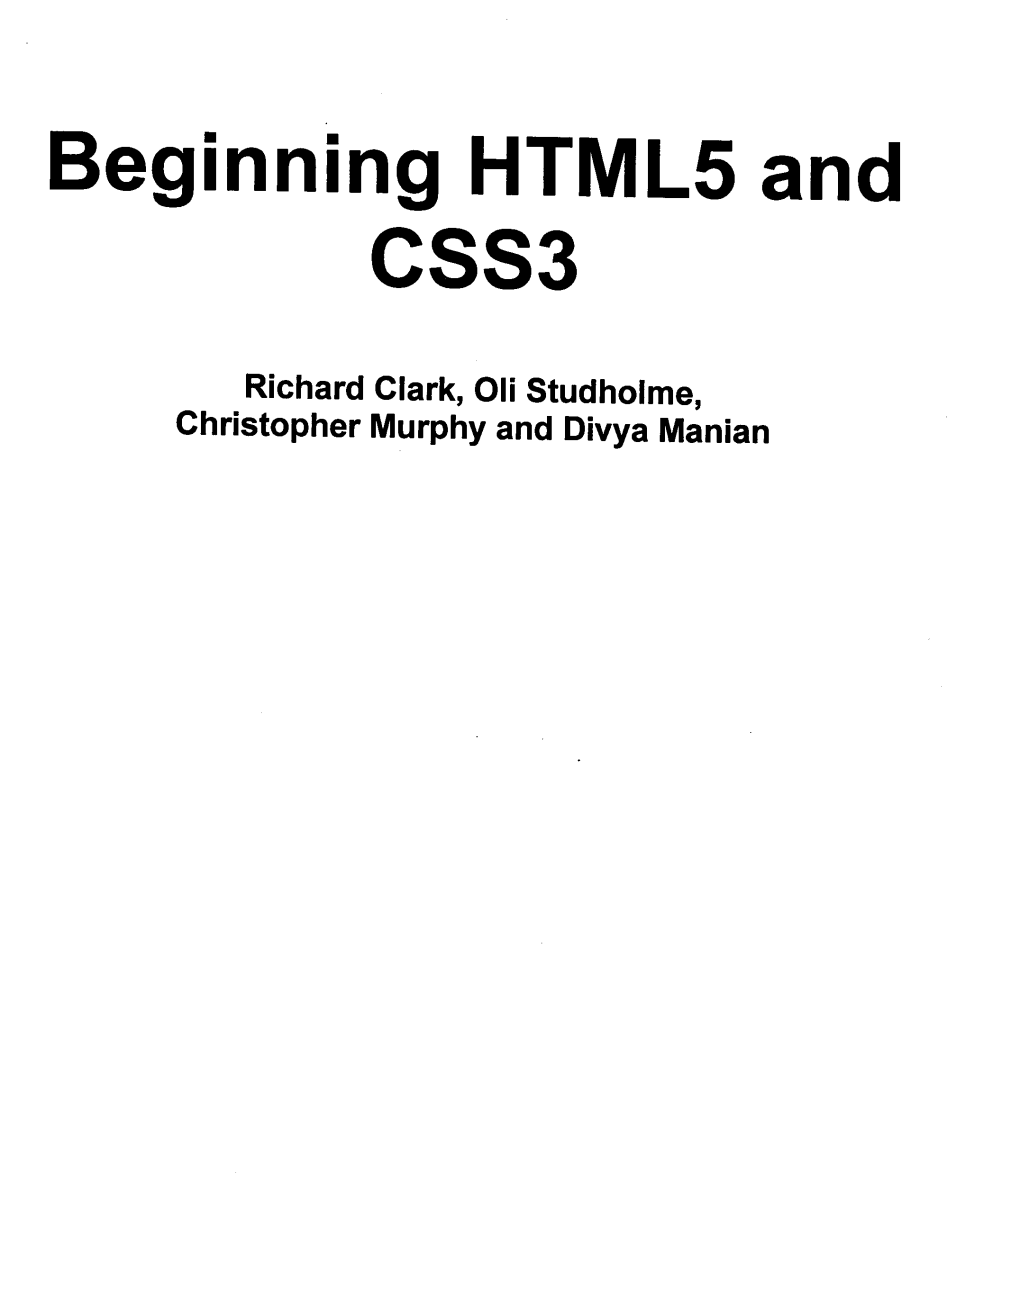 Beginning HTML5 and CSS3 : [The Web Evolved ; Next Generation Web Standards]